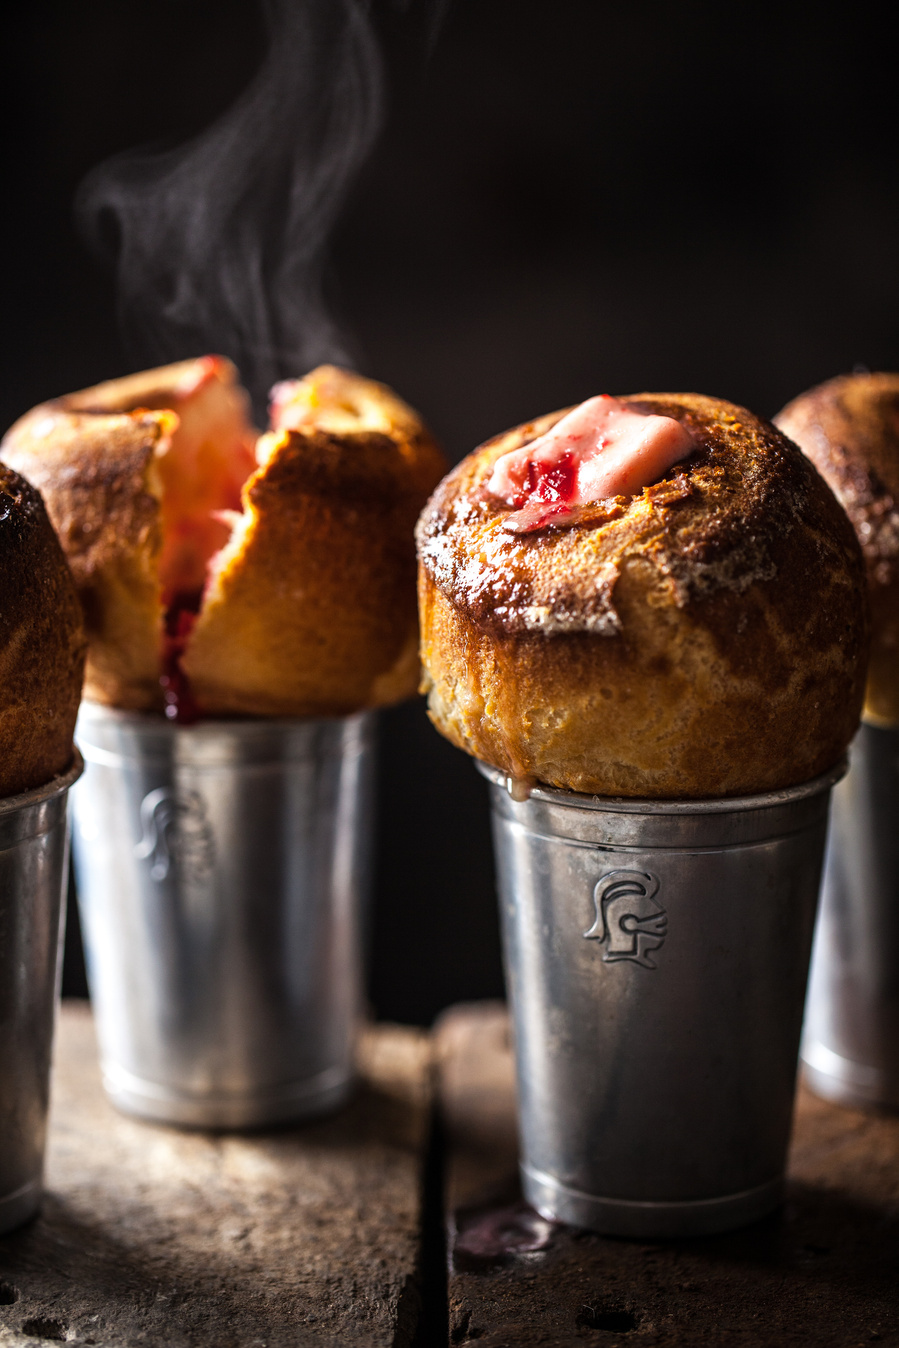 Dark food photography of strawberry popovers spilling out of shiny tins and steaming. Hard light highlights the baking photography